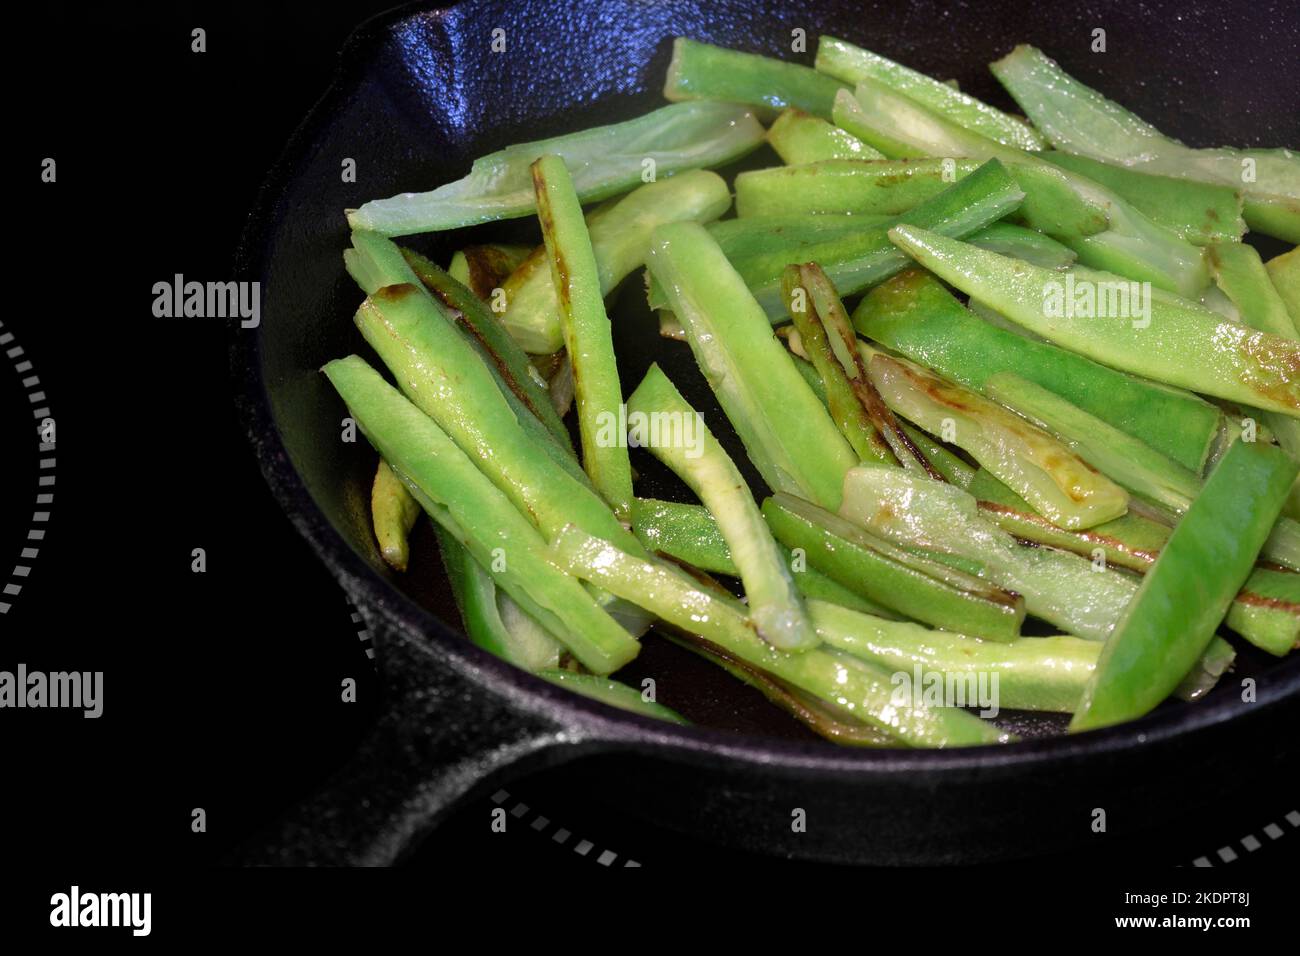 Frying green beans, with olive oil, in a cast iron frying pan, on an electric hob stove. Stock Photo